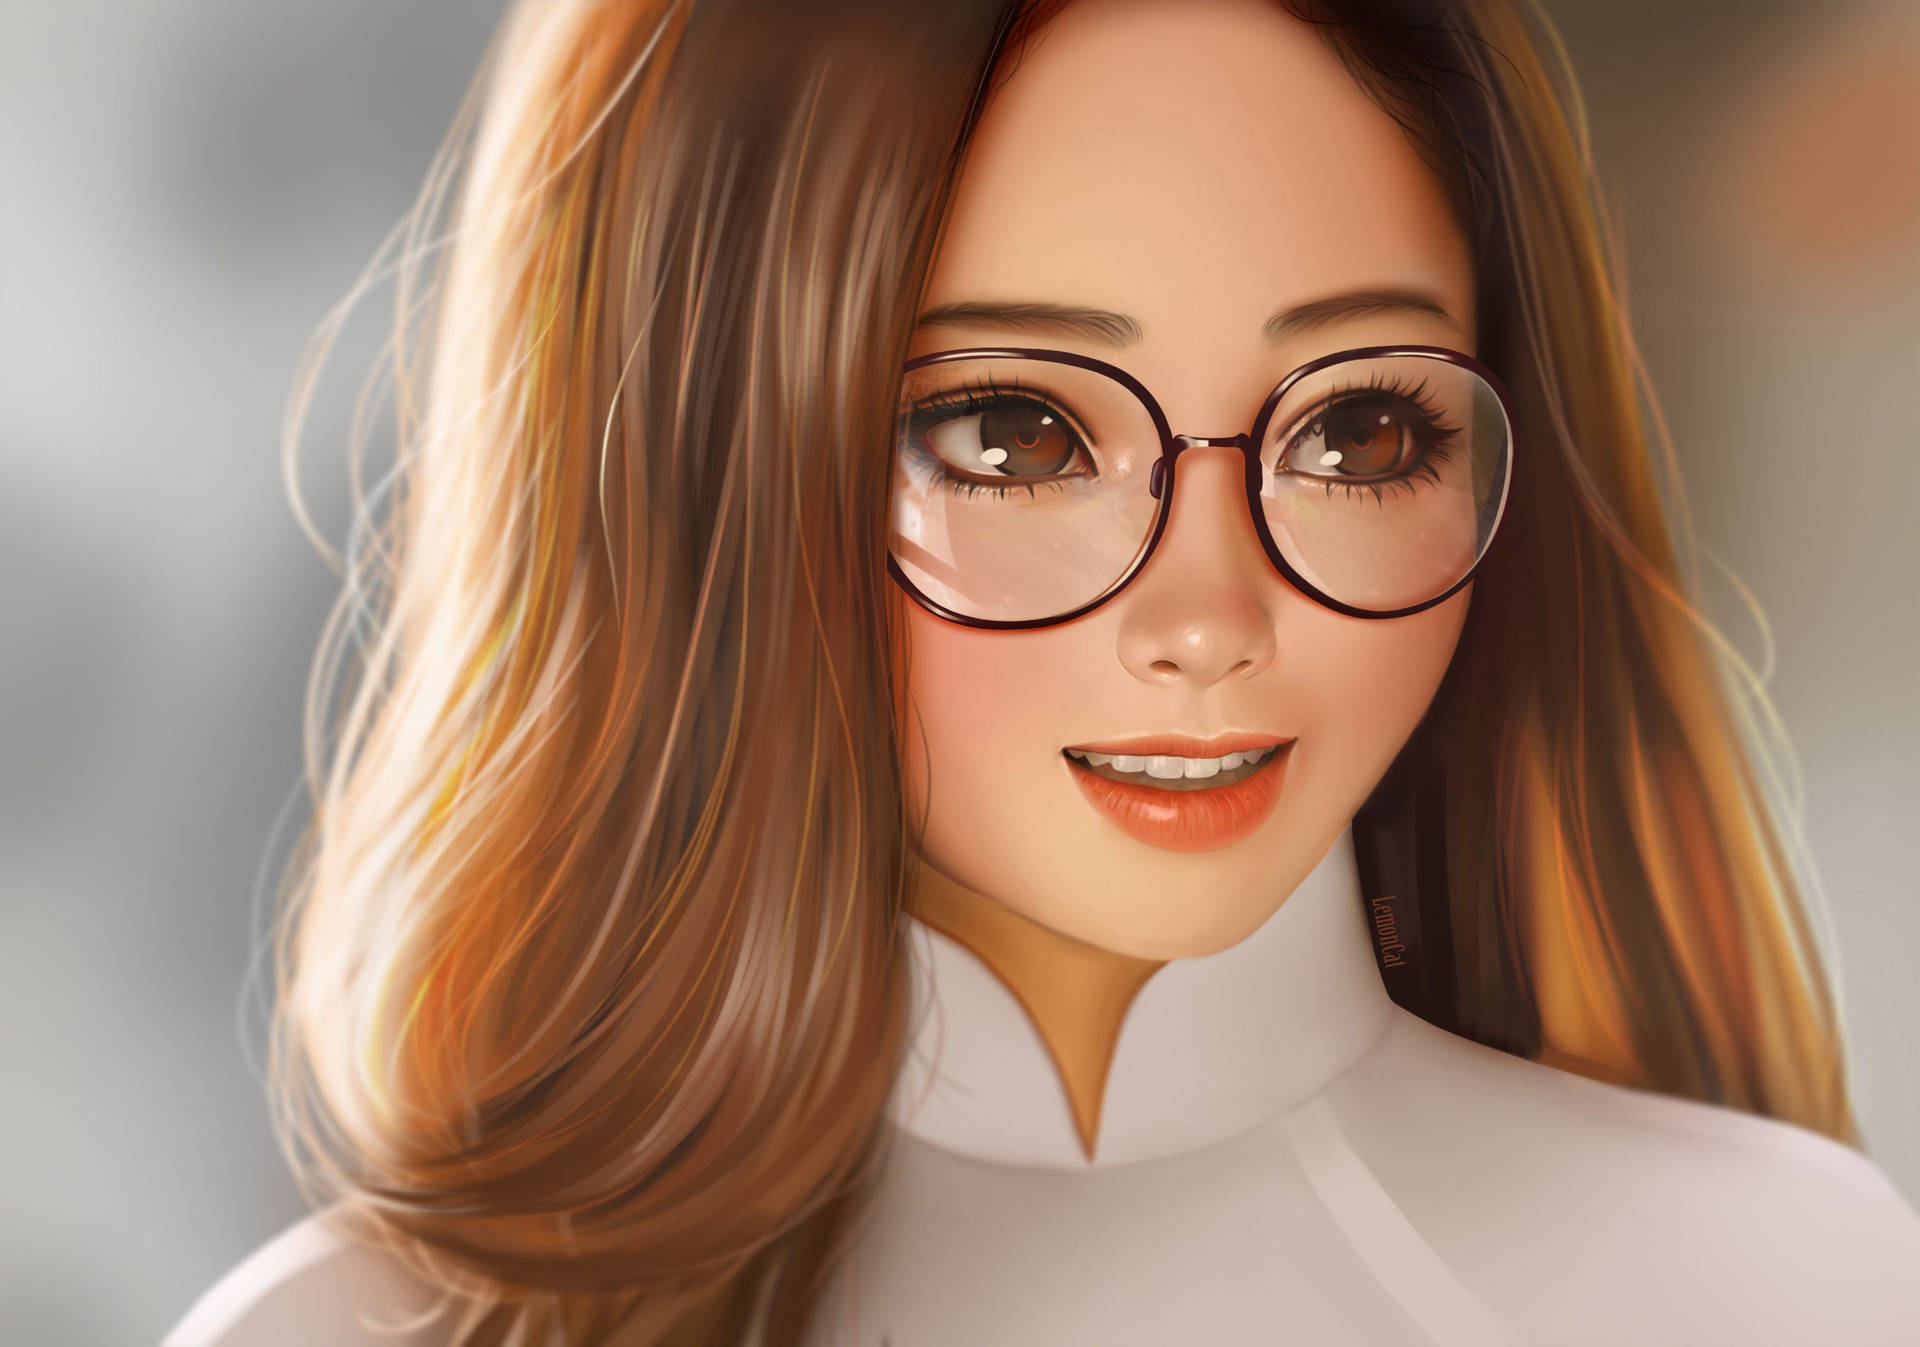 Cute Girl With Glasses Artwork